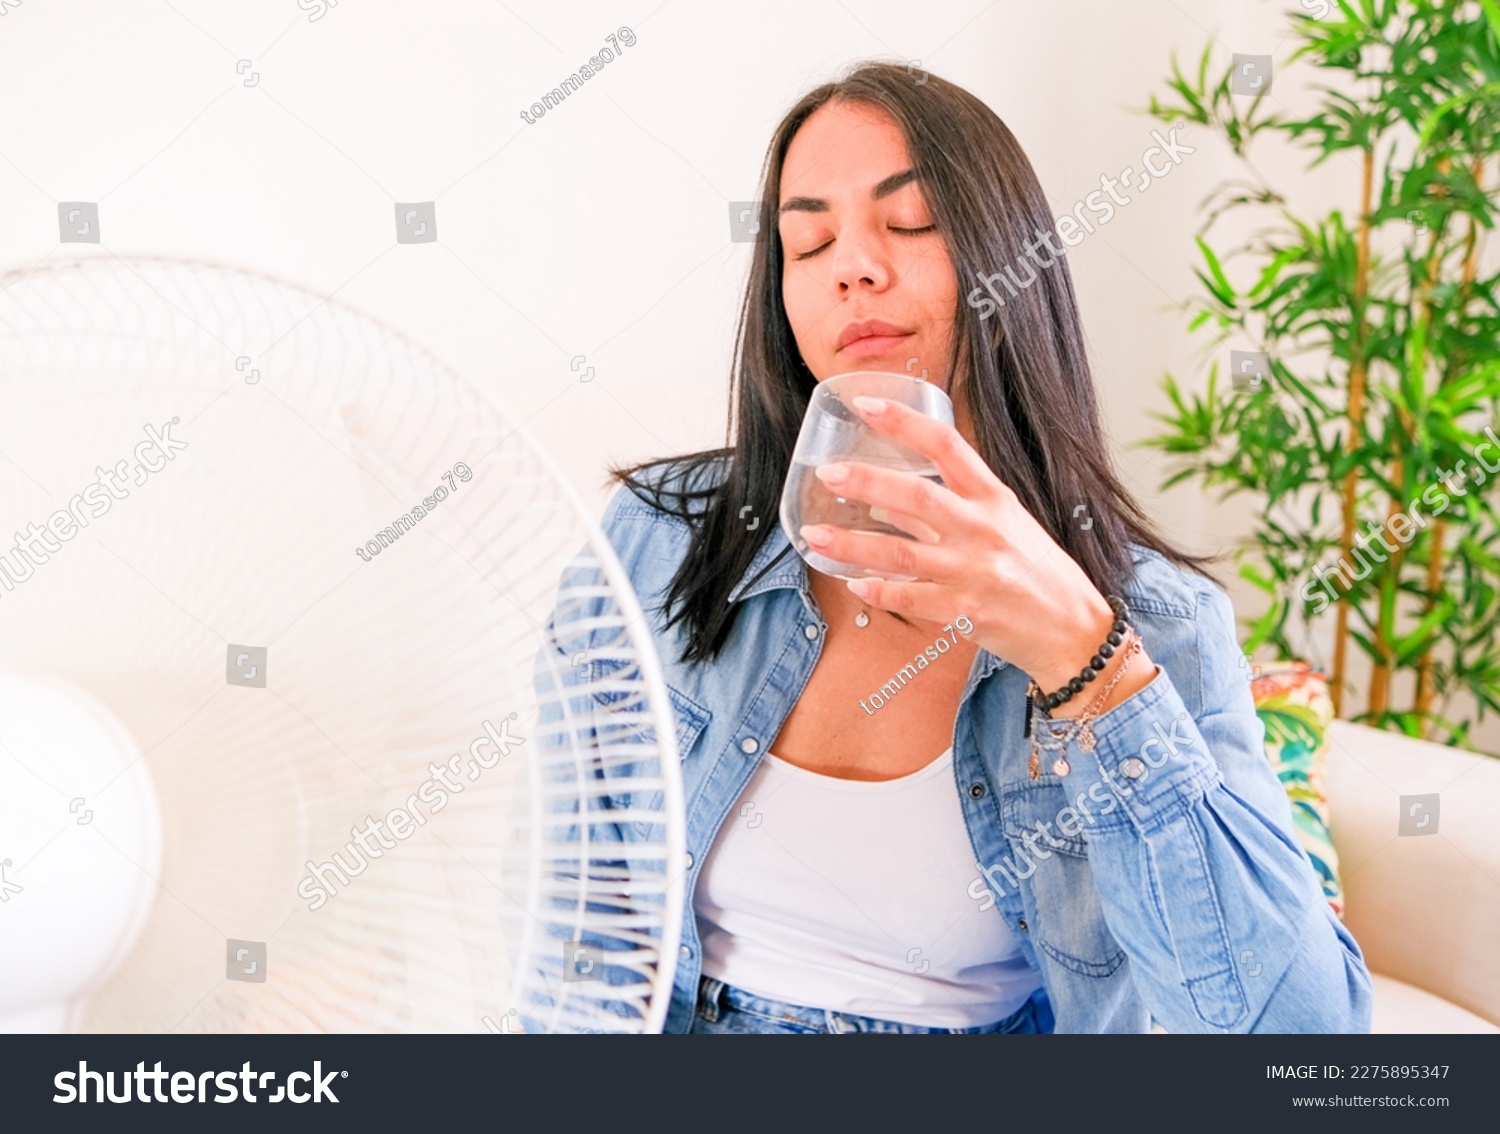 Woman suffering summer heat trying to stay cool and comfortable during heat wave #2275895347